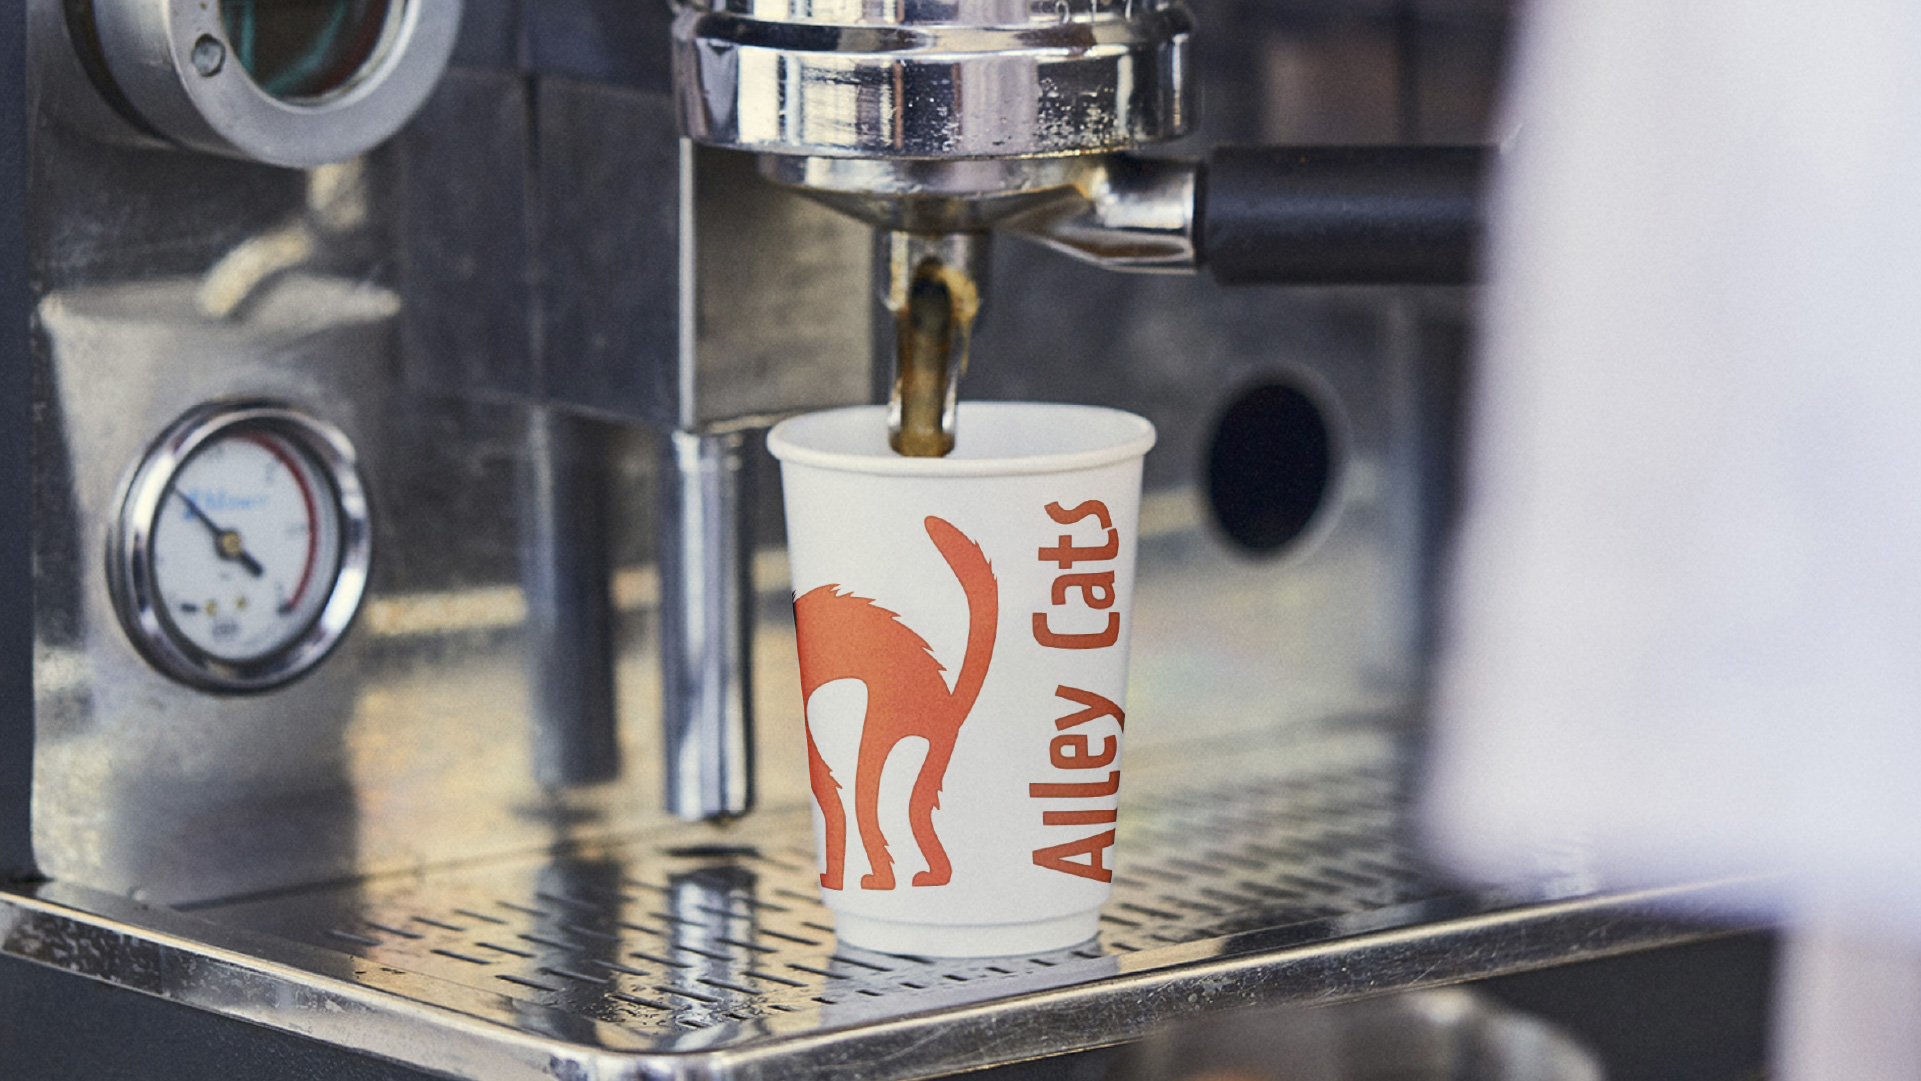 logo of alley cats printed on a paper cup that's sat under an espresso machine